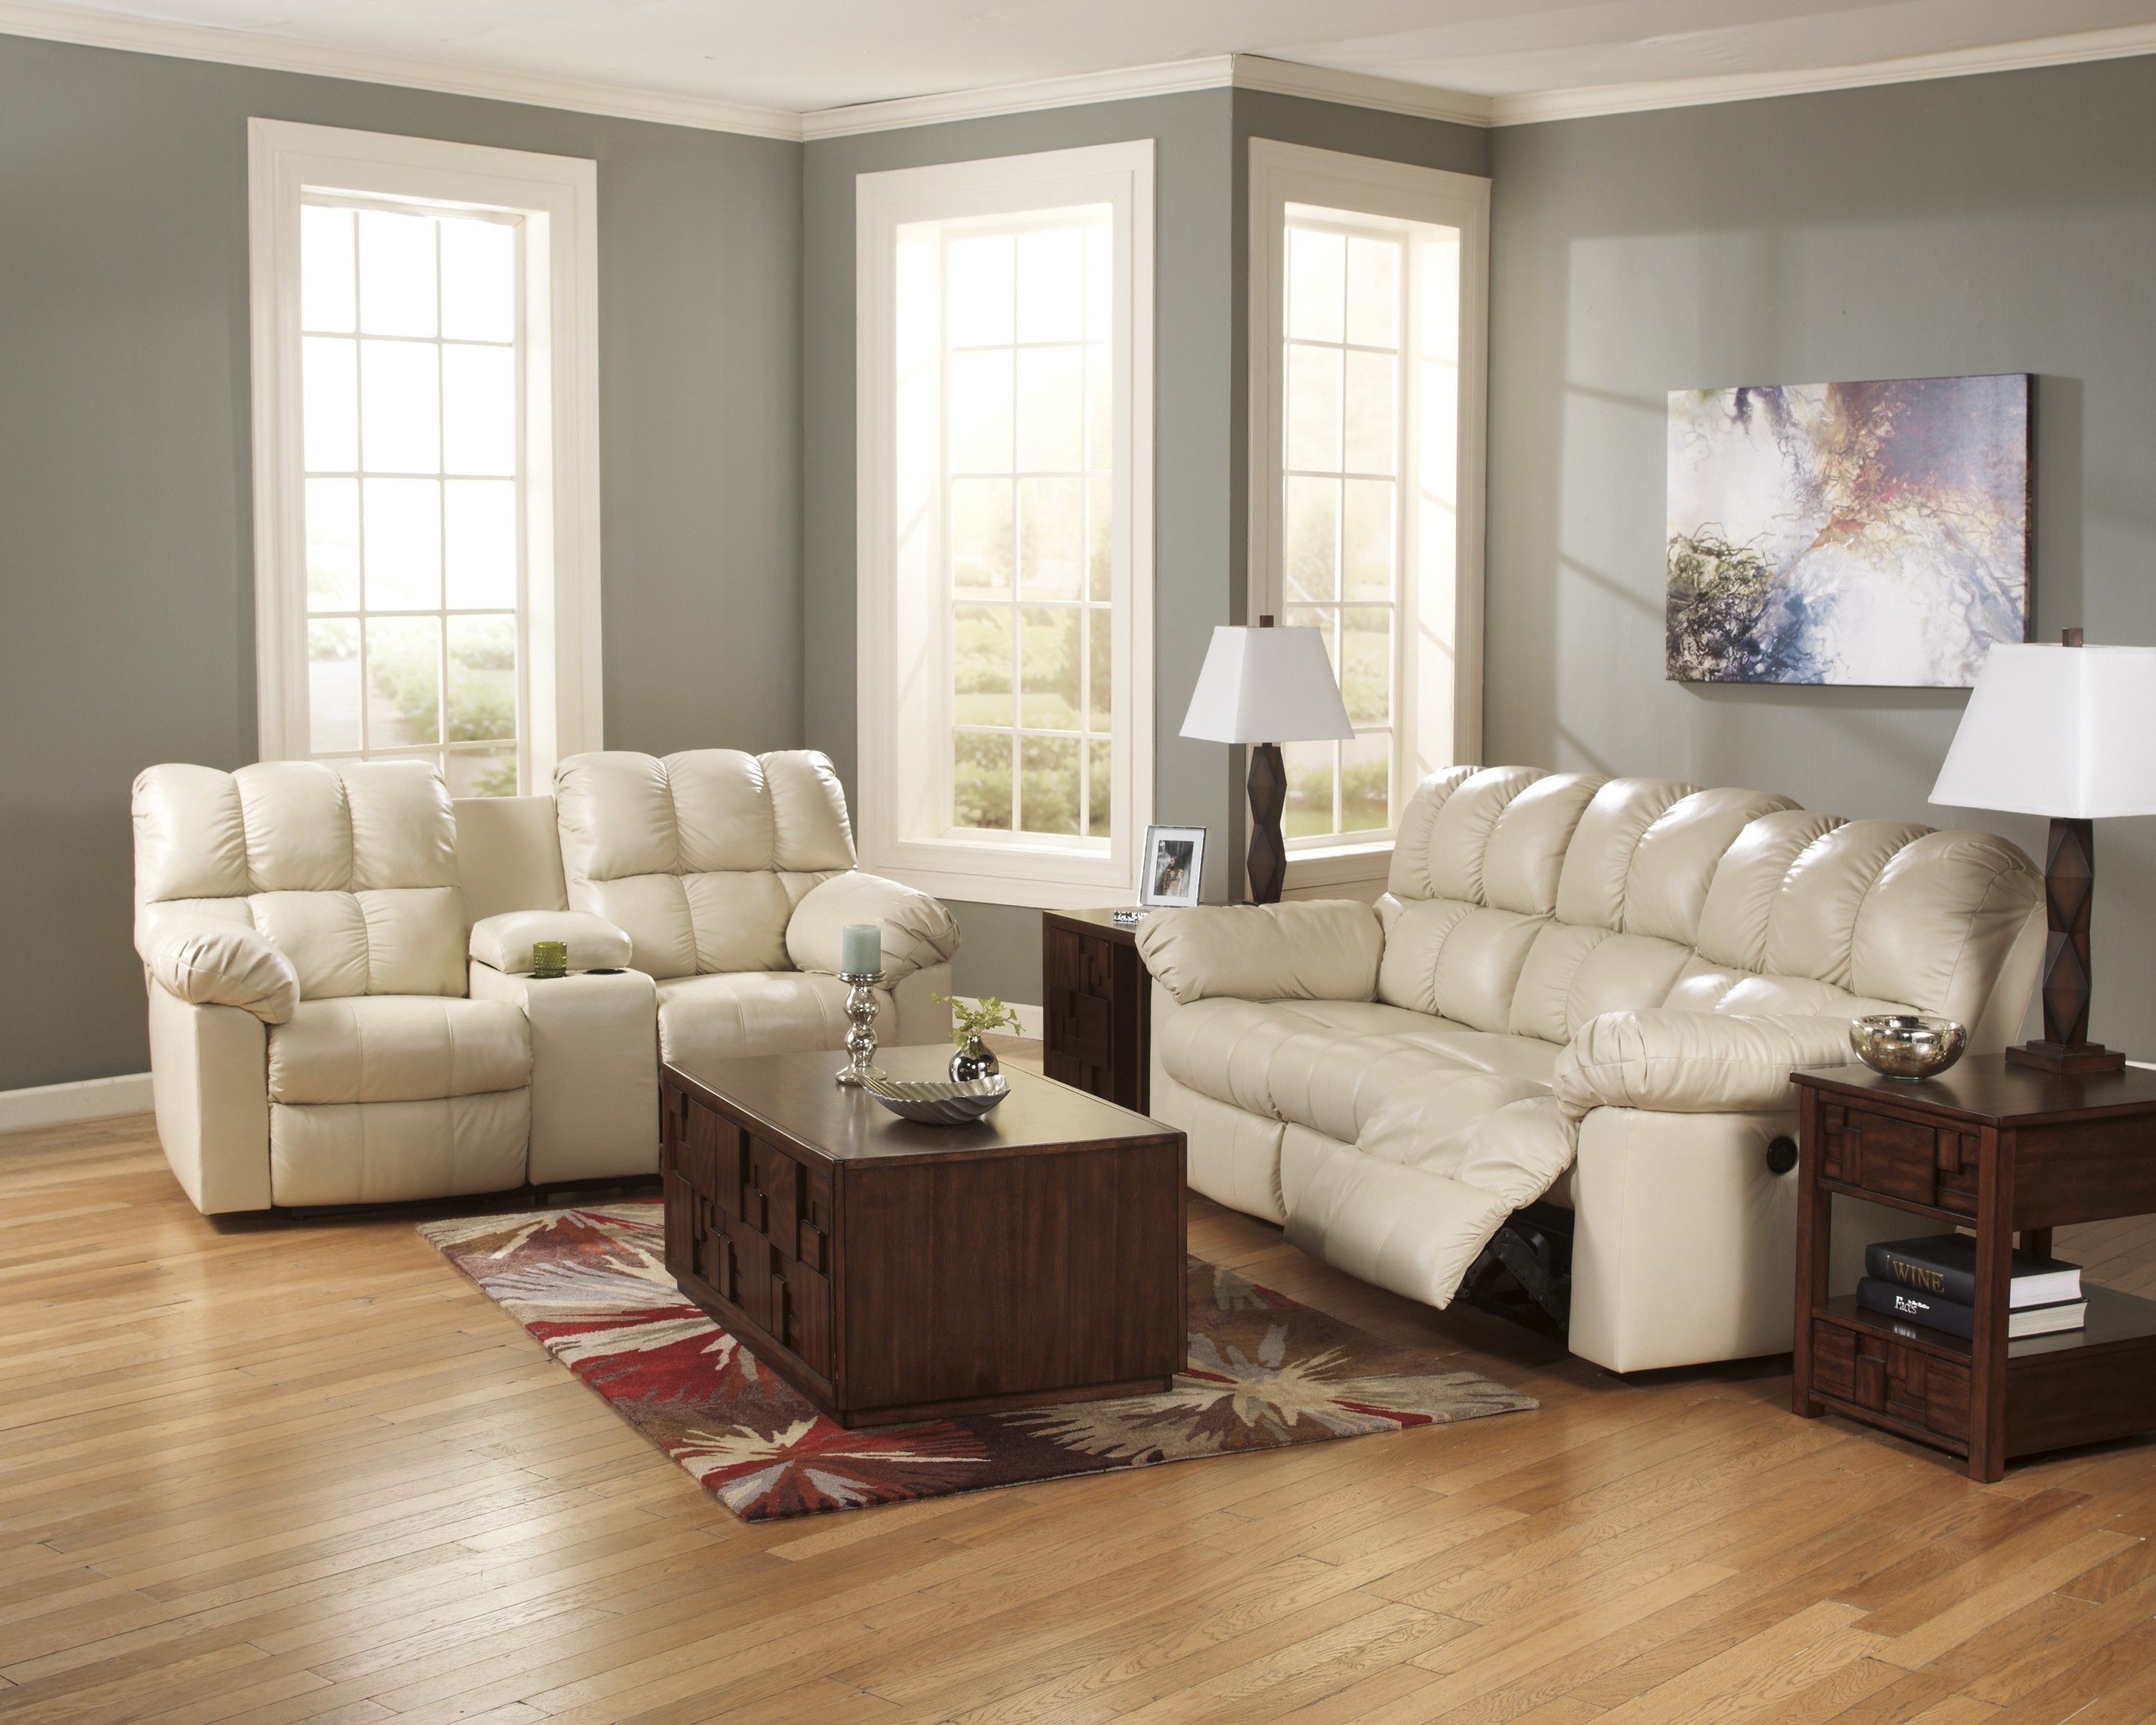 16 Cream Colored Leather Sofa Auto Auctions In Cream Colored Sofas (View 2 of 12)